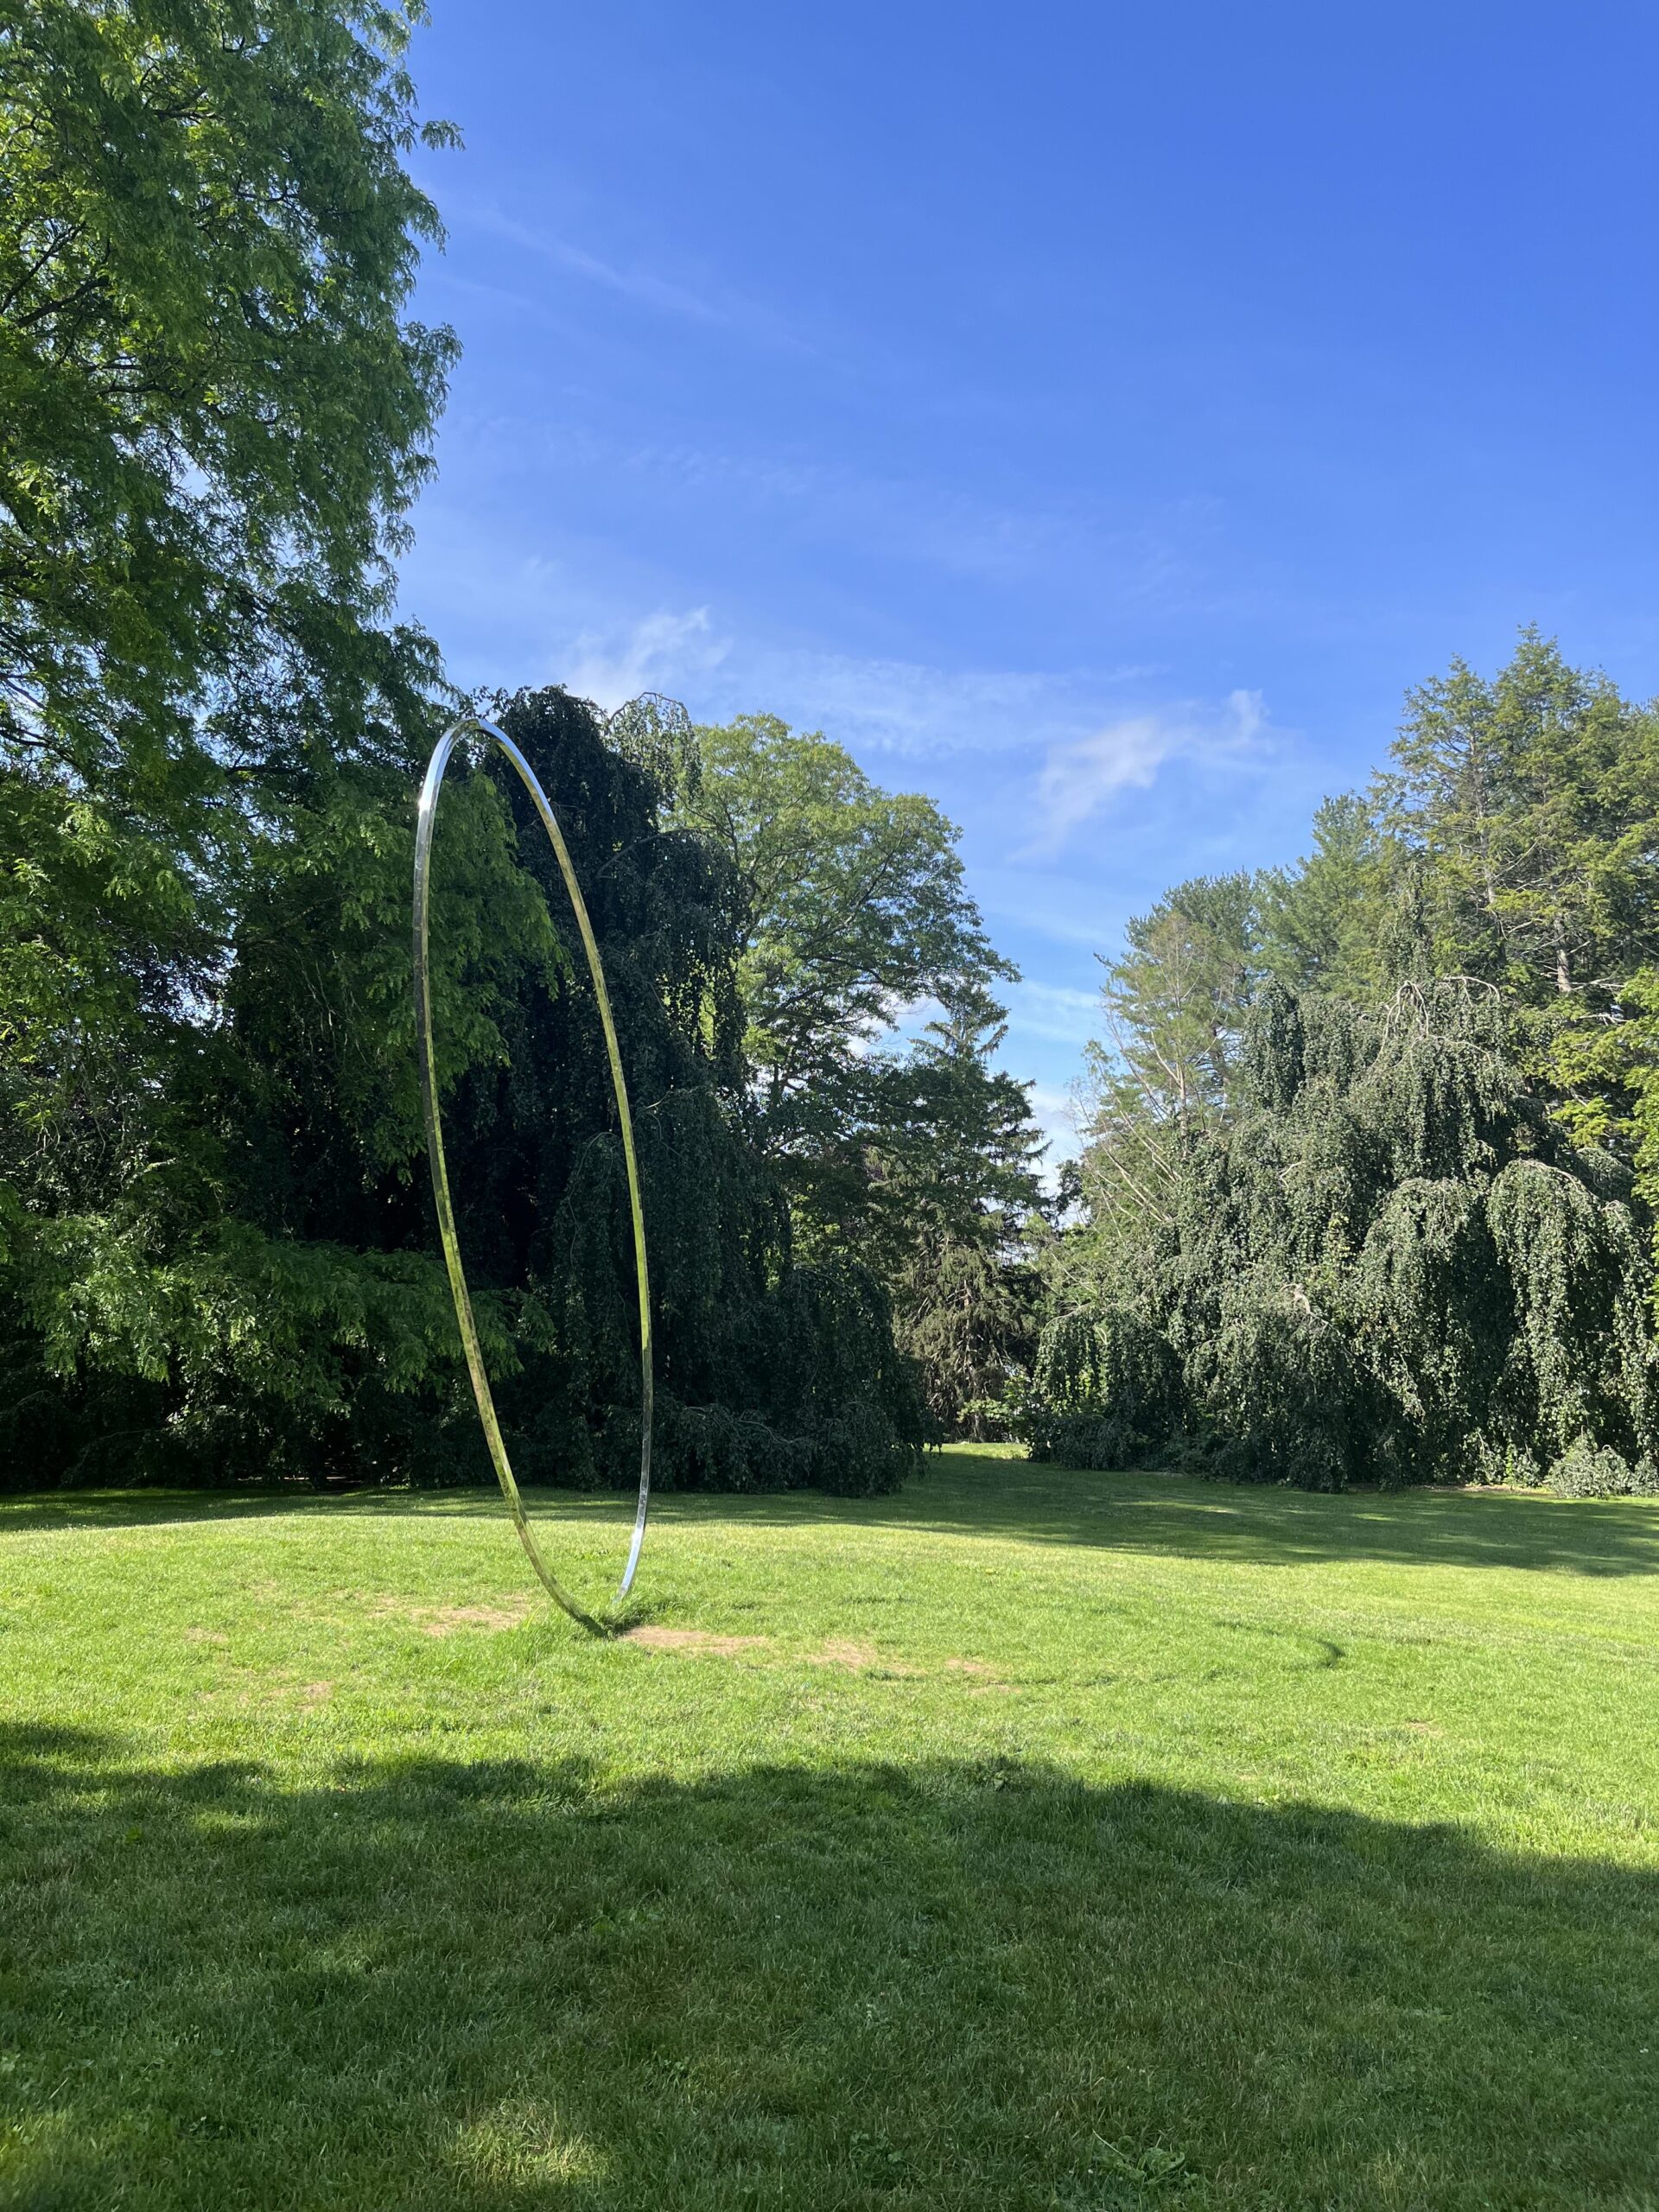 a large elliptical sculpture on a green lawn with blue sky and trees in the background